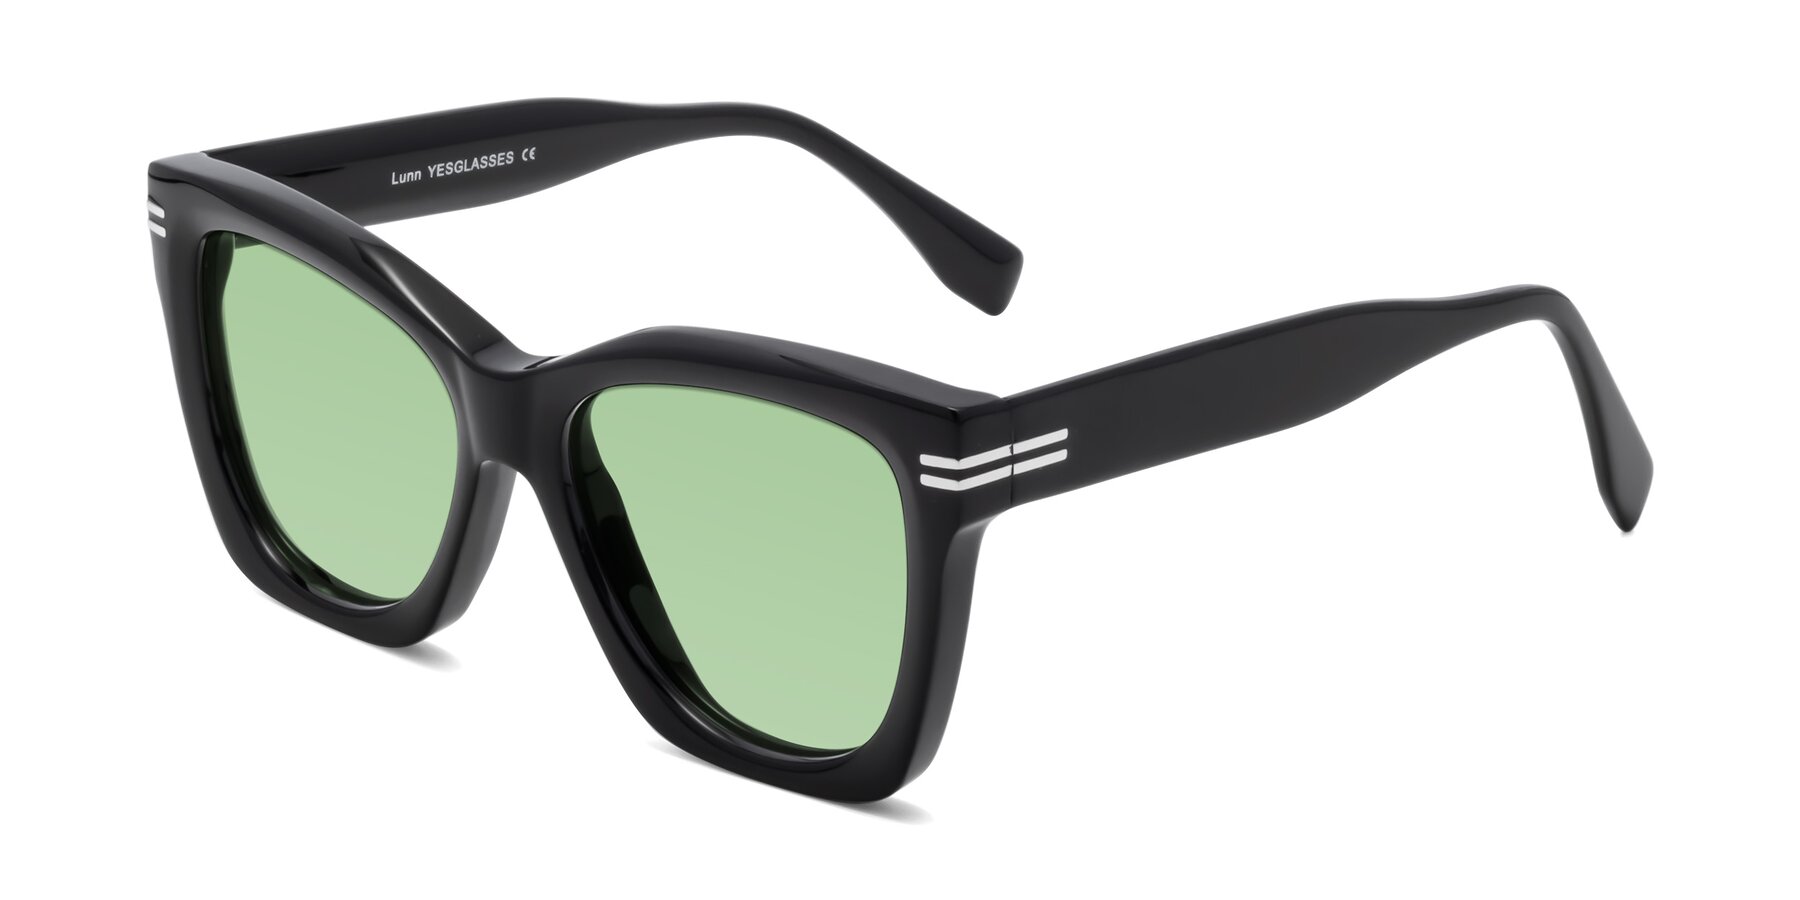 Angle of Lunn in Black with Medium Green Tinted Lenses